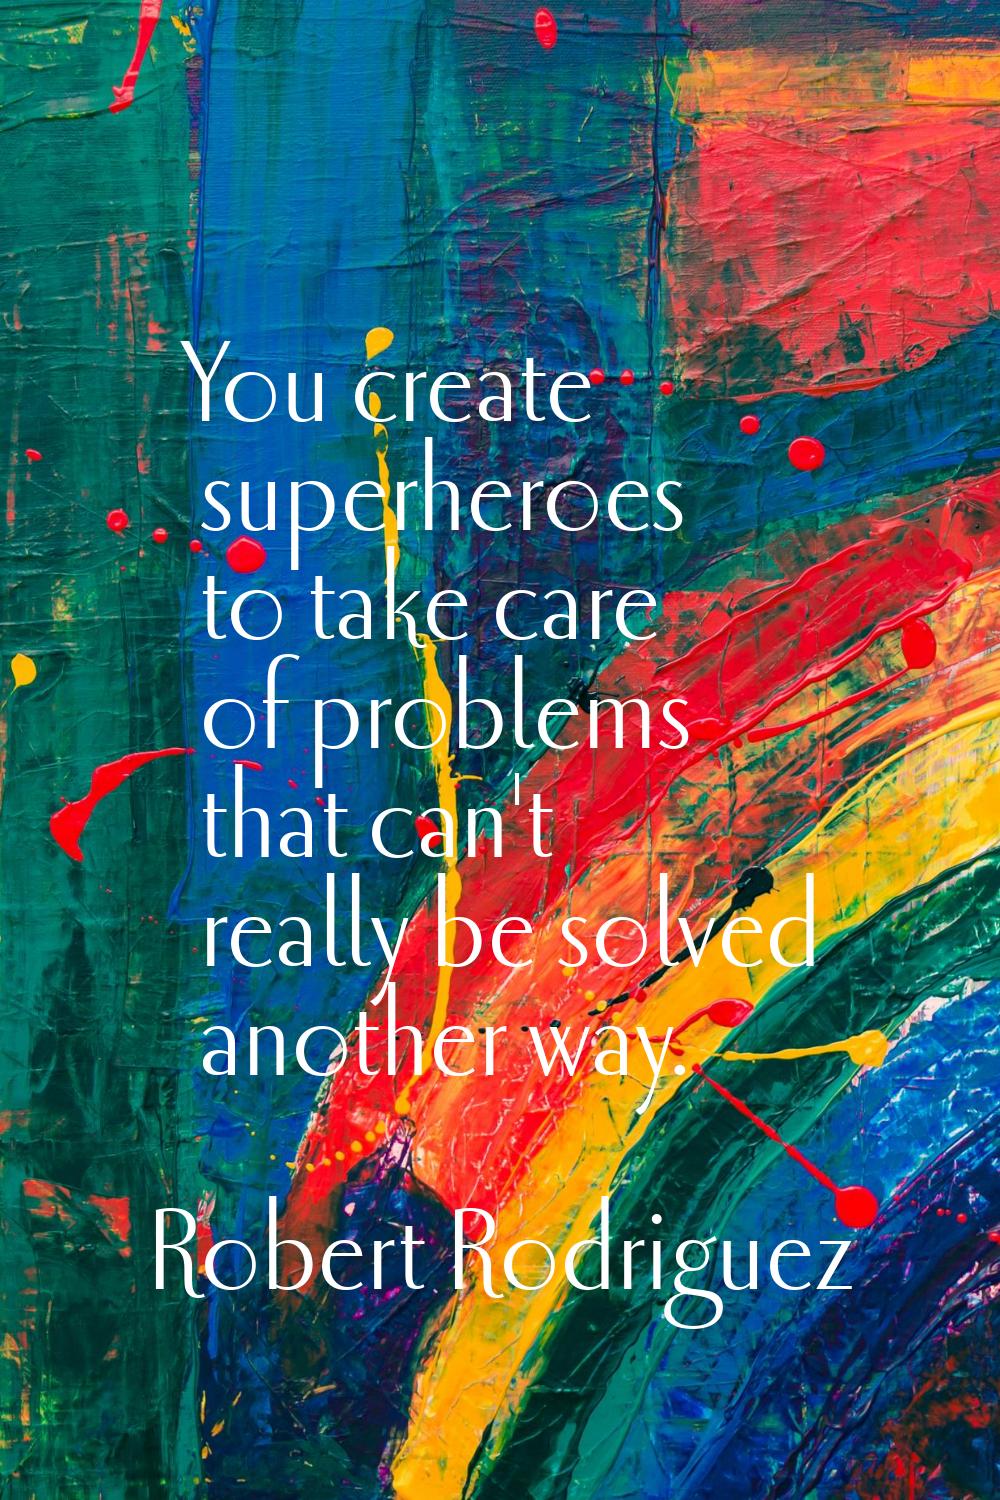 You create superheroes to take care of problems that can't really be solved another way.